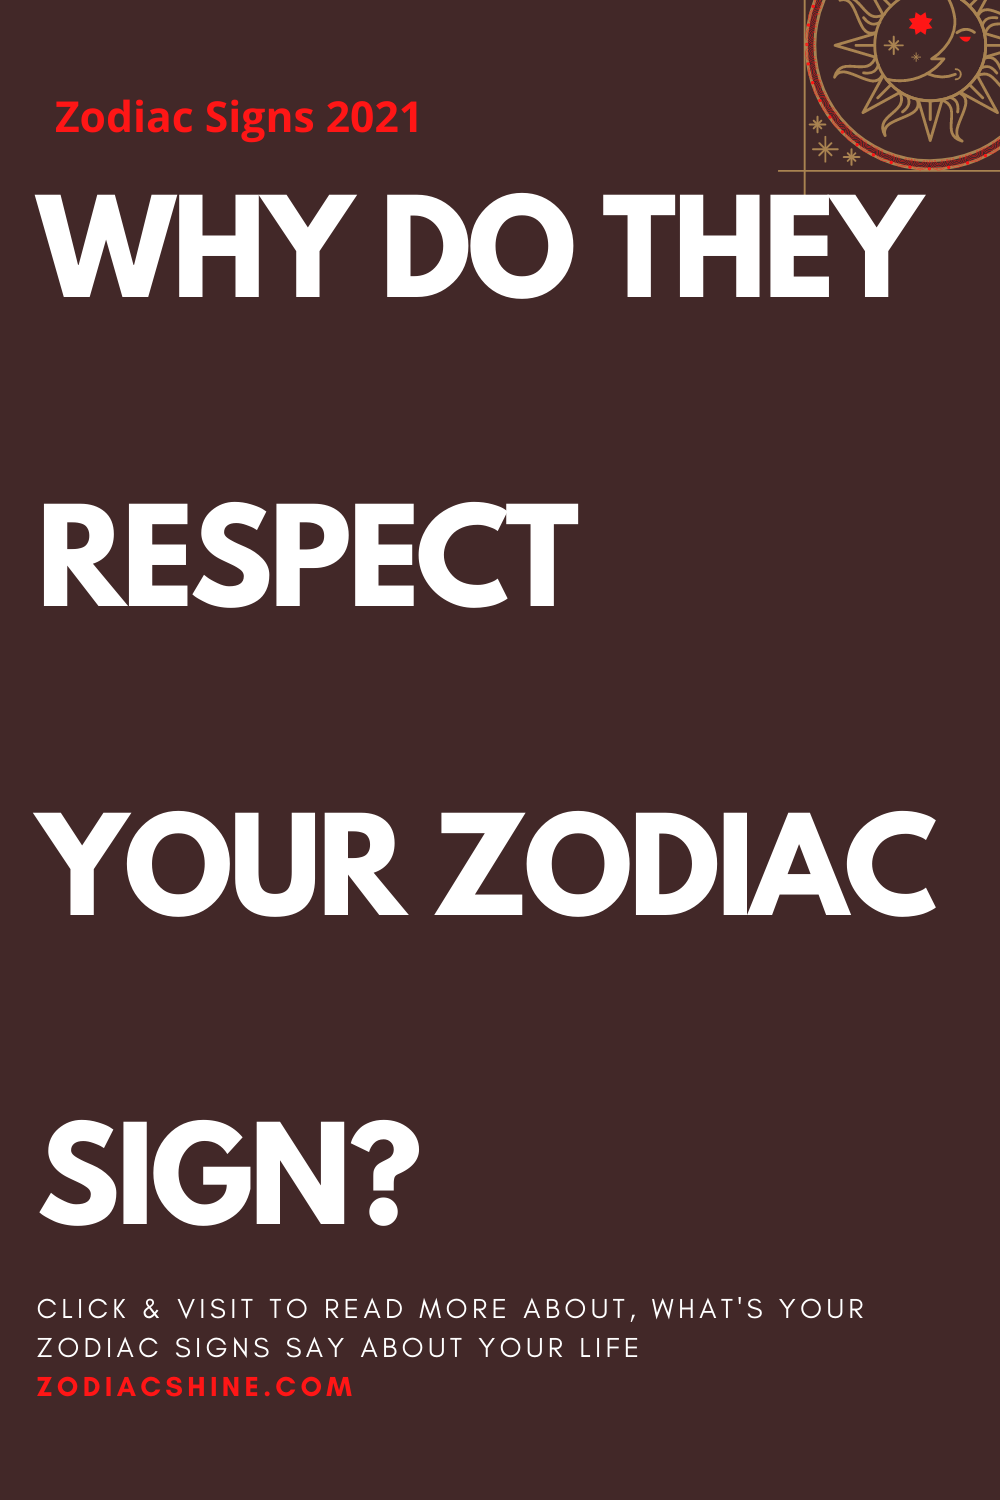 WHY DO THEY RESPECT YOUR ZODIAC SIGN?